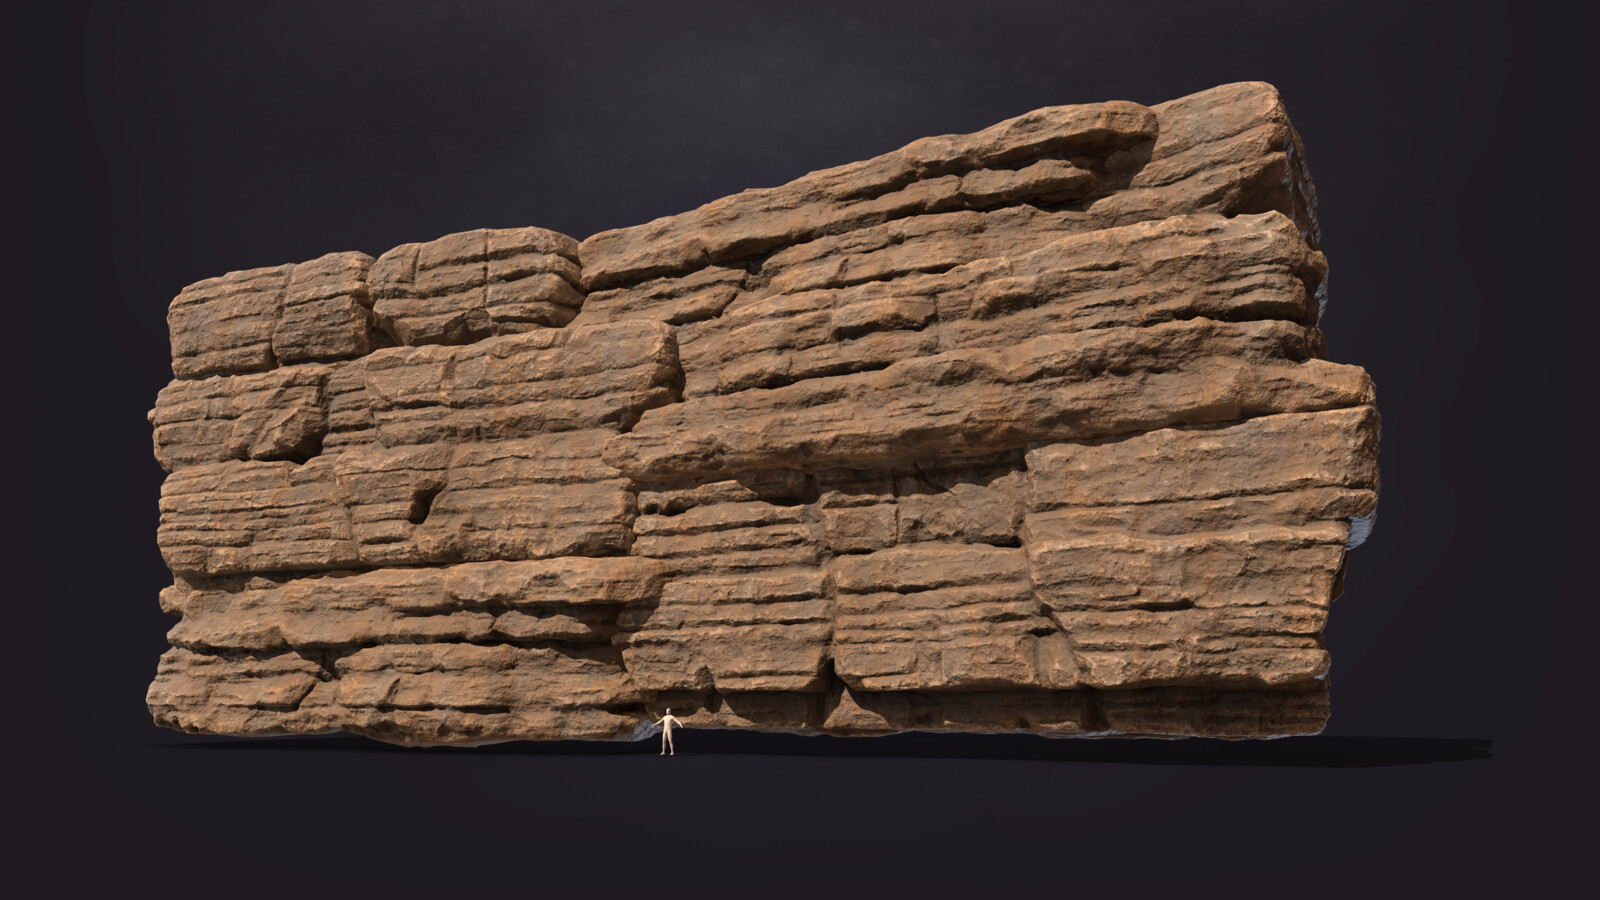 An example of just the two cliff walls stacked and rotated around to make a larger rock formation